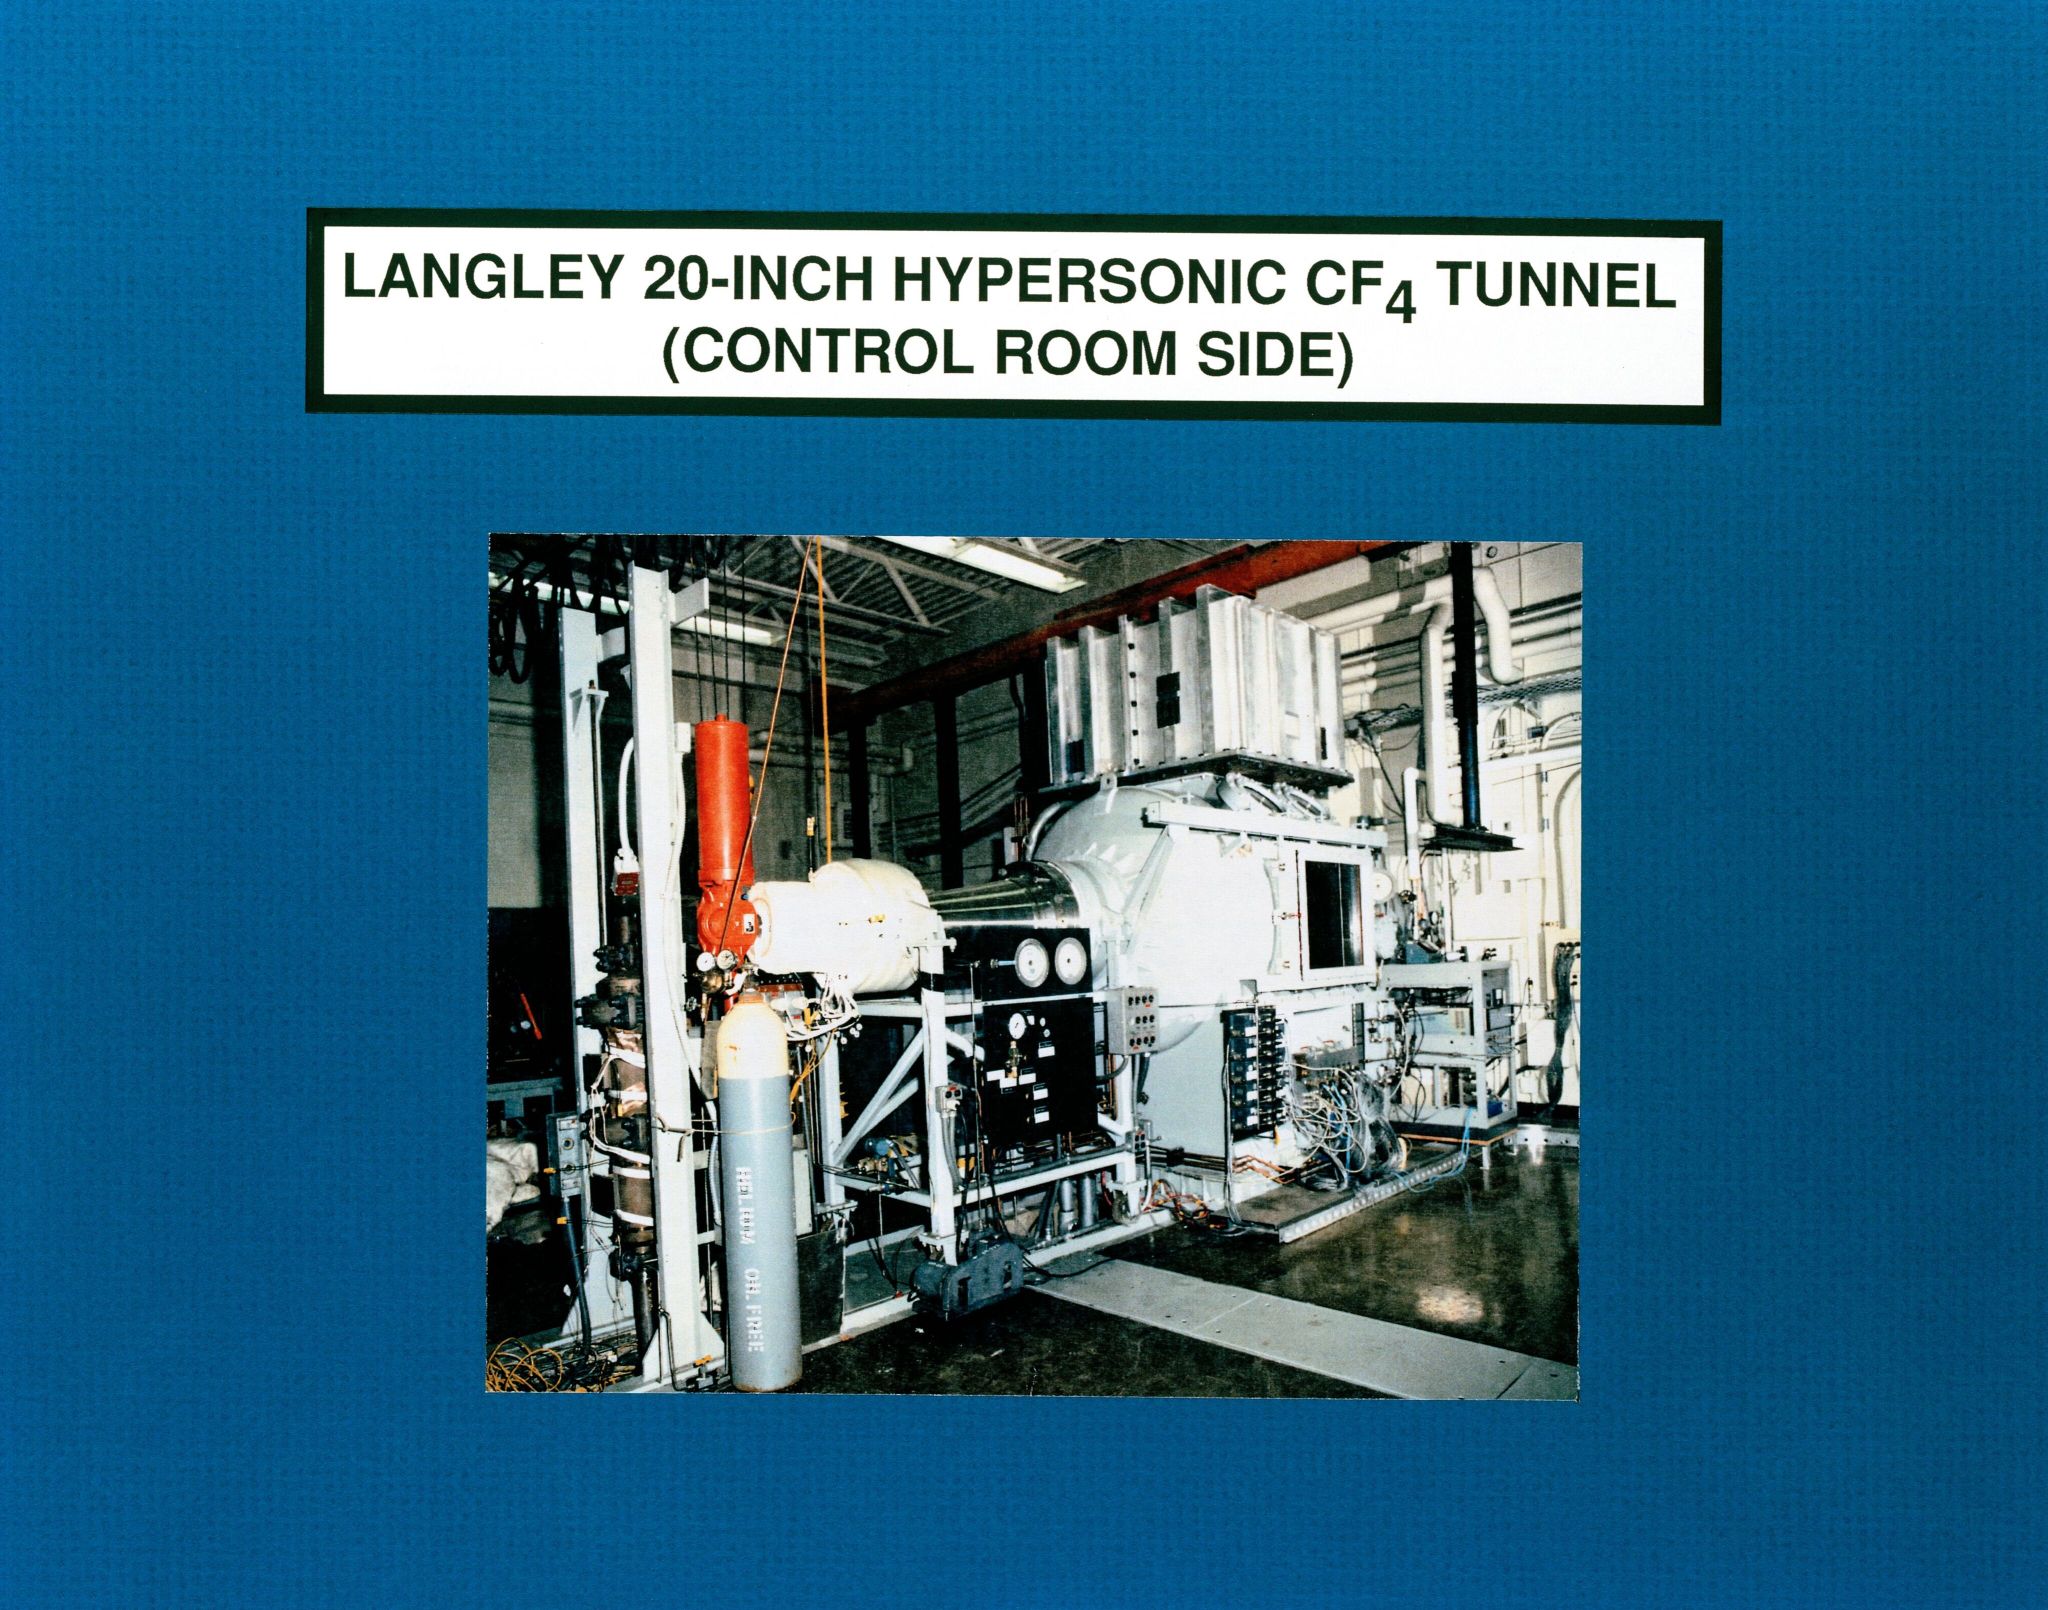 An image of the Langley 20-inch hypersonic CF4 tunnel (control room side). 